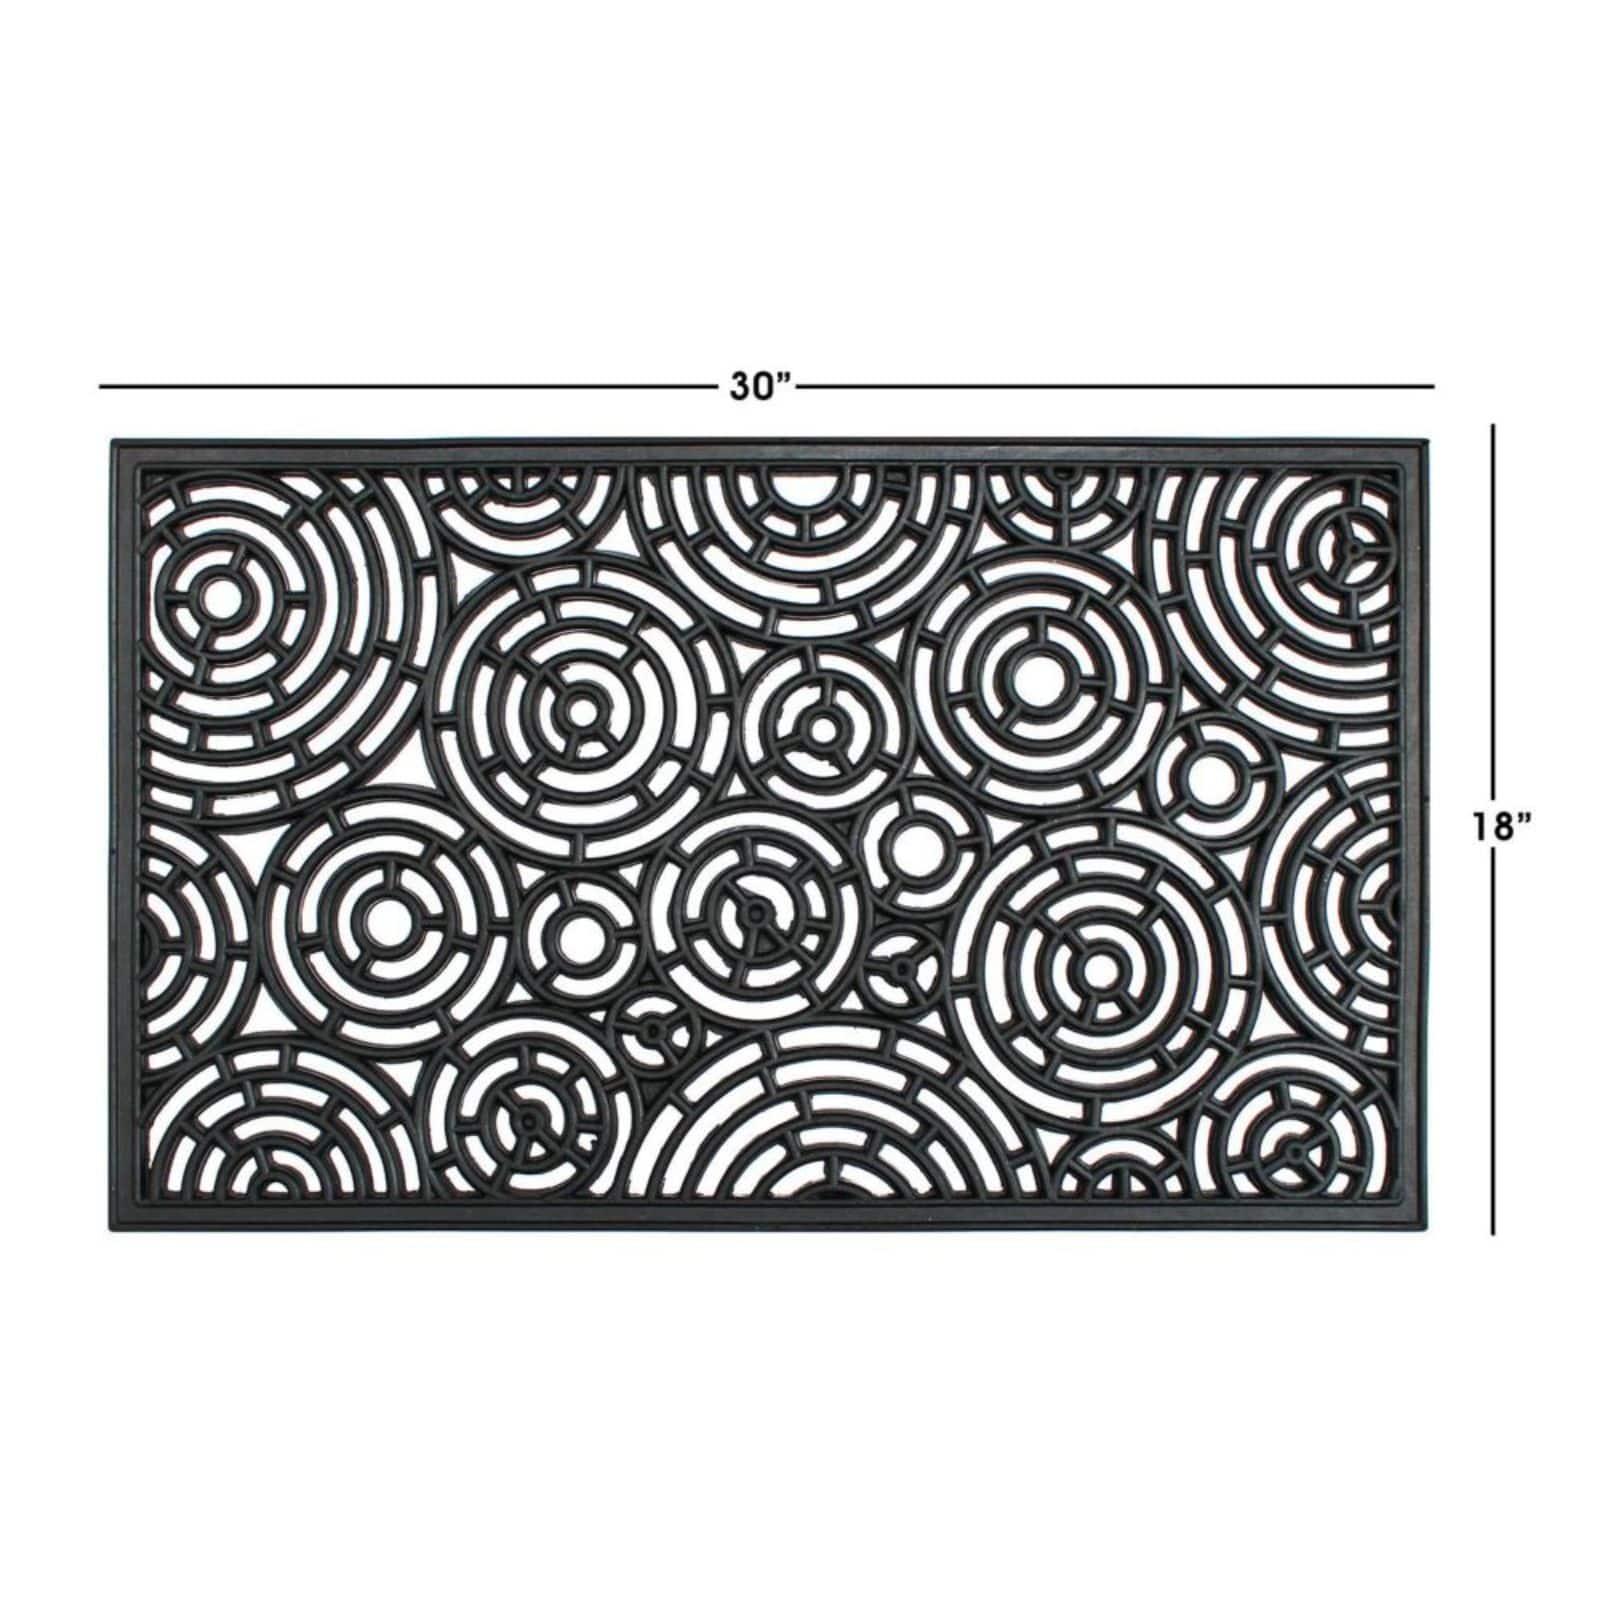 RugSmith Black Molded Circle Patterns Rubber Doormat